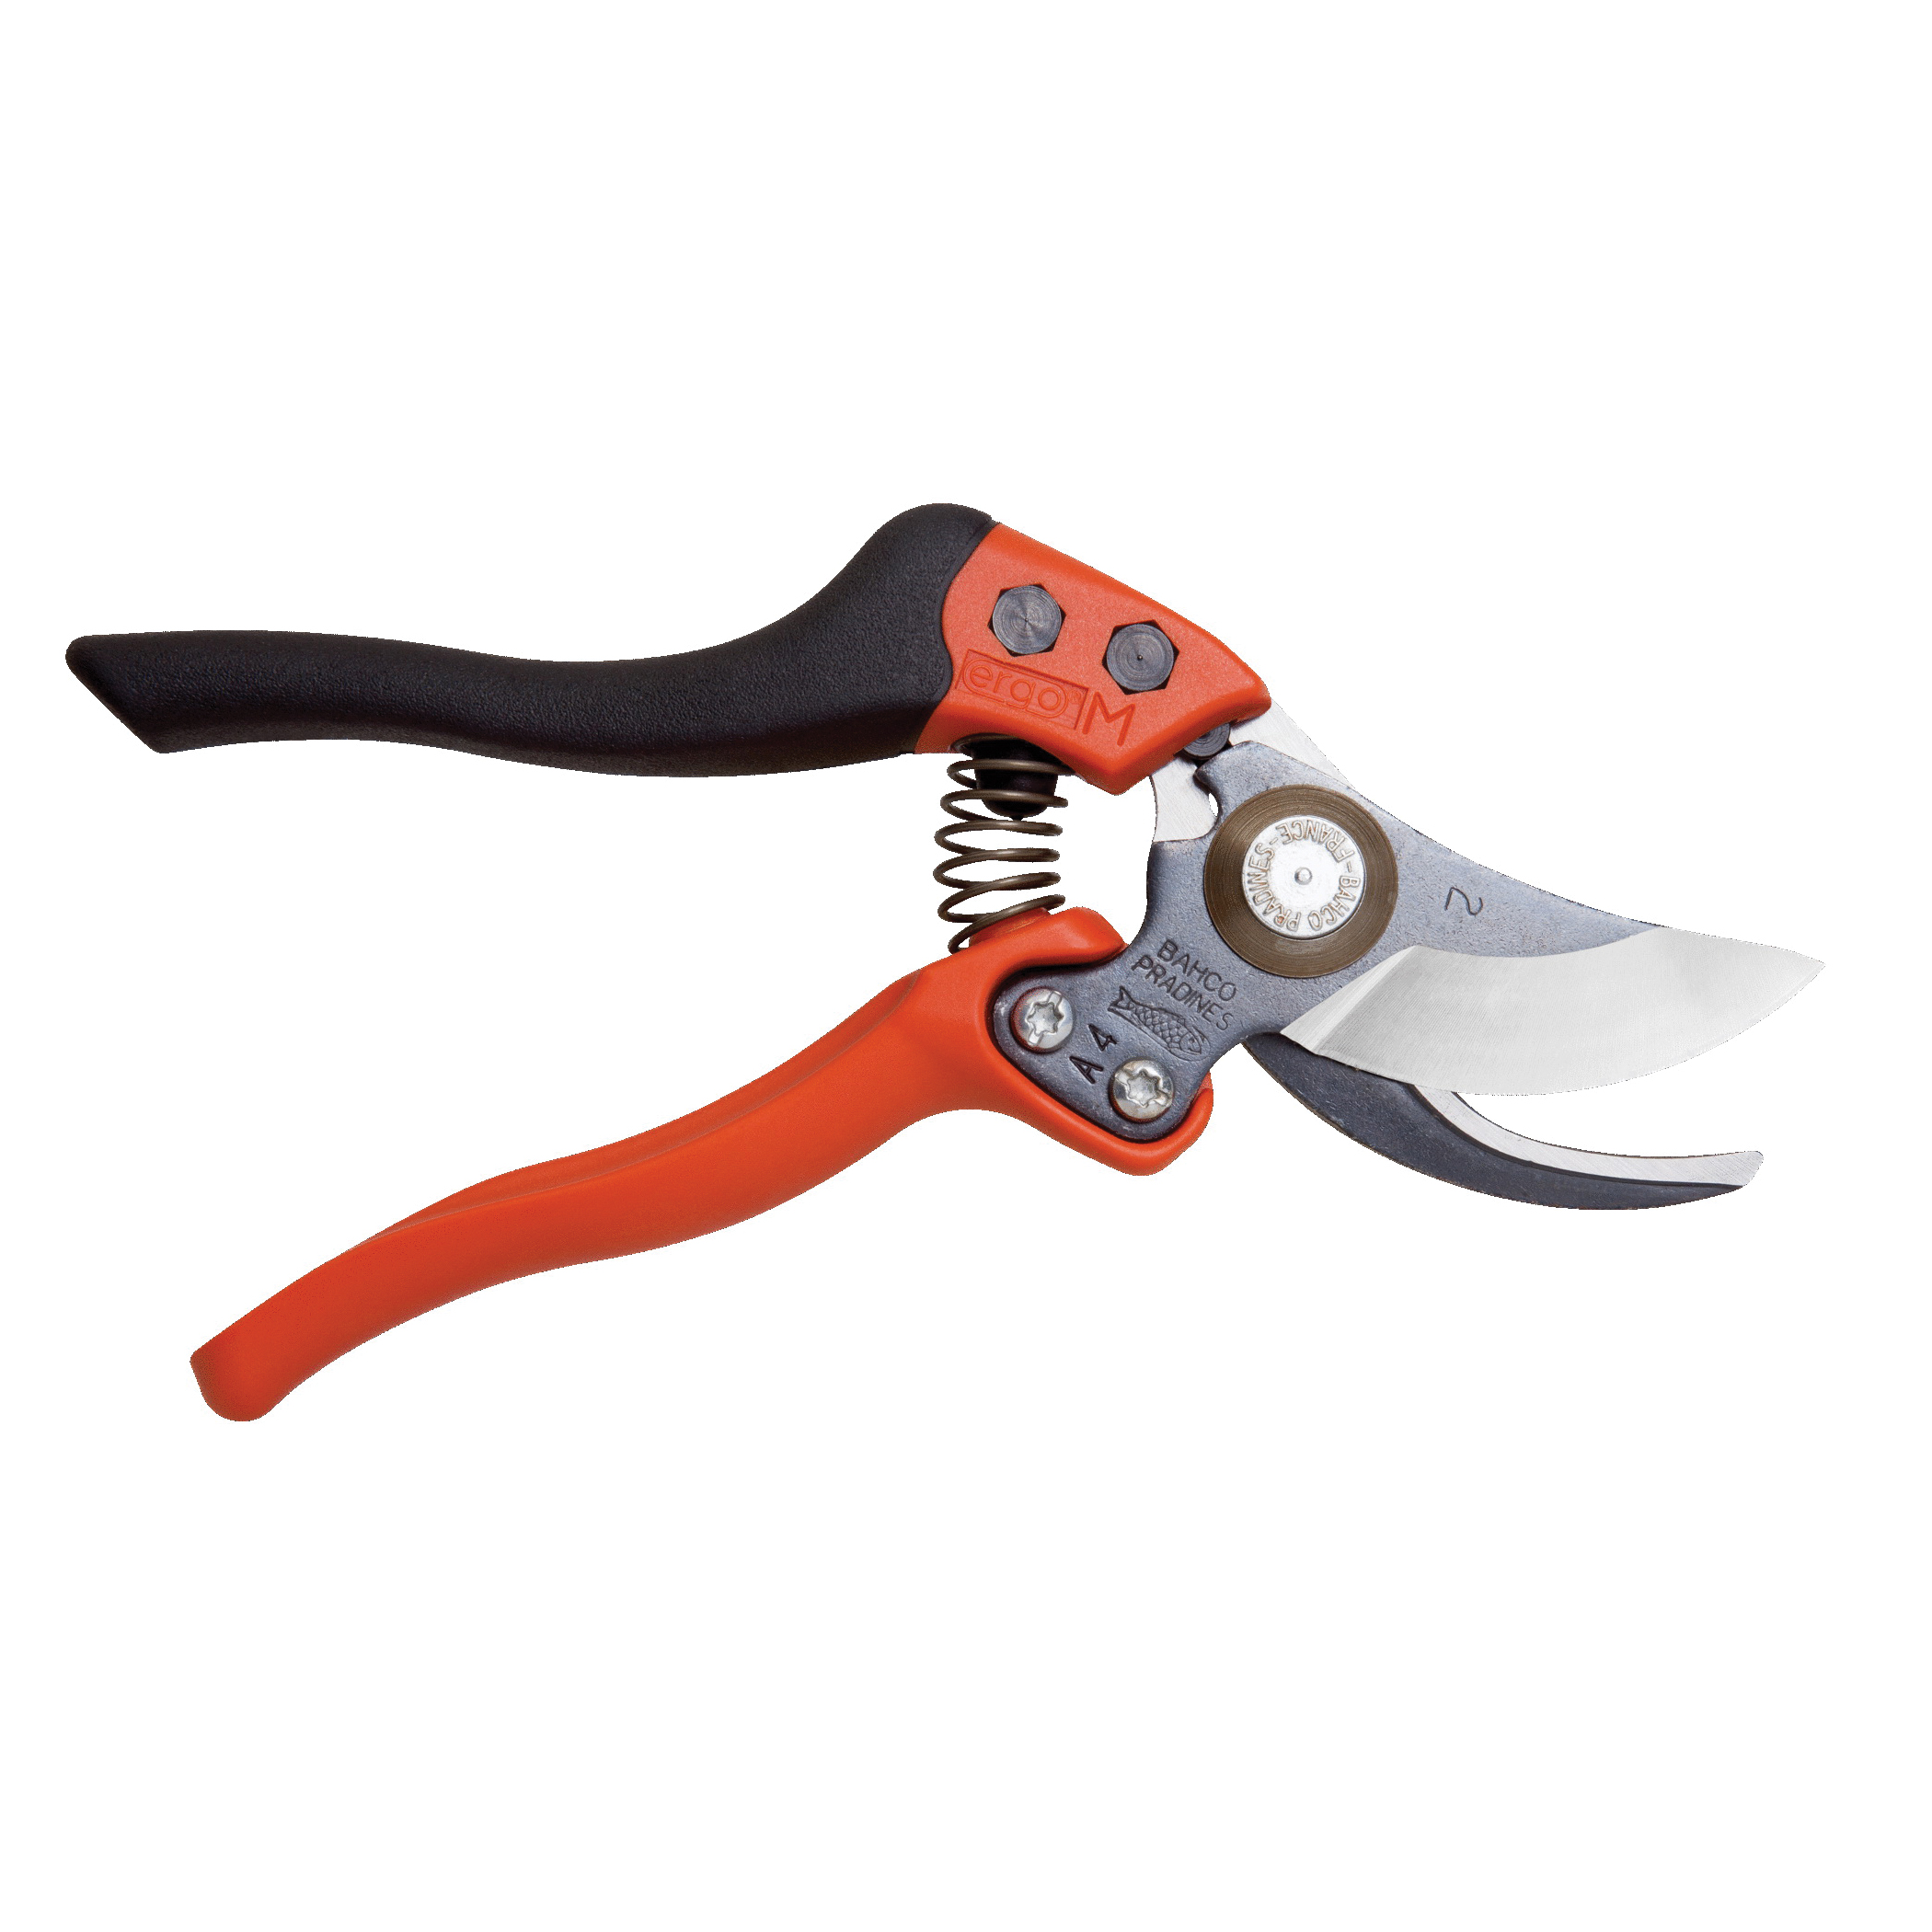 Bahco PX-S1 Secateur, 15 mm Cutting Capacity, Bypass Blad